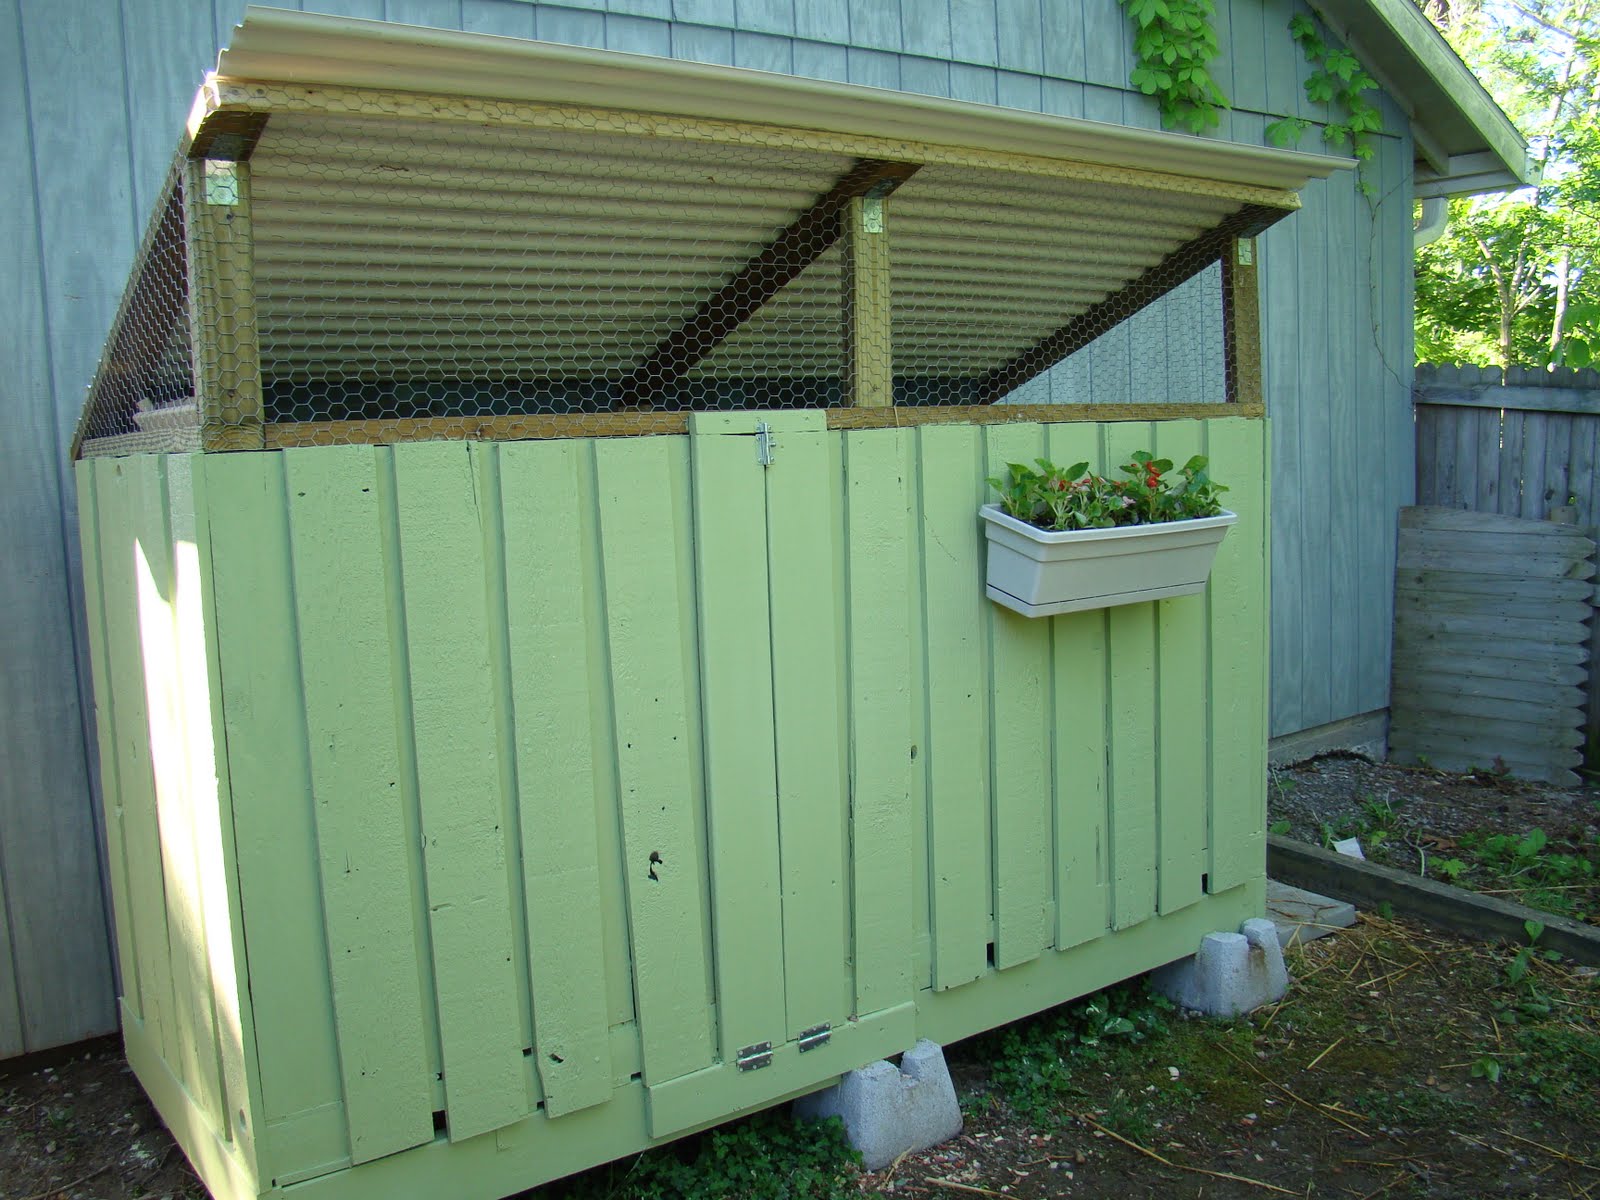 Cool Coops! - Pallet Coop | Community Chickens